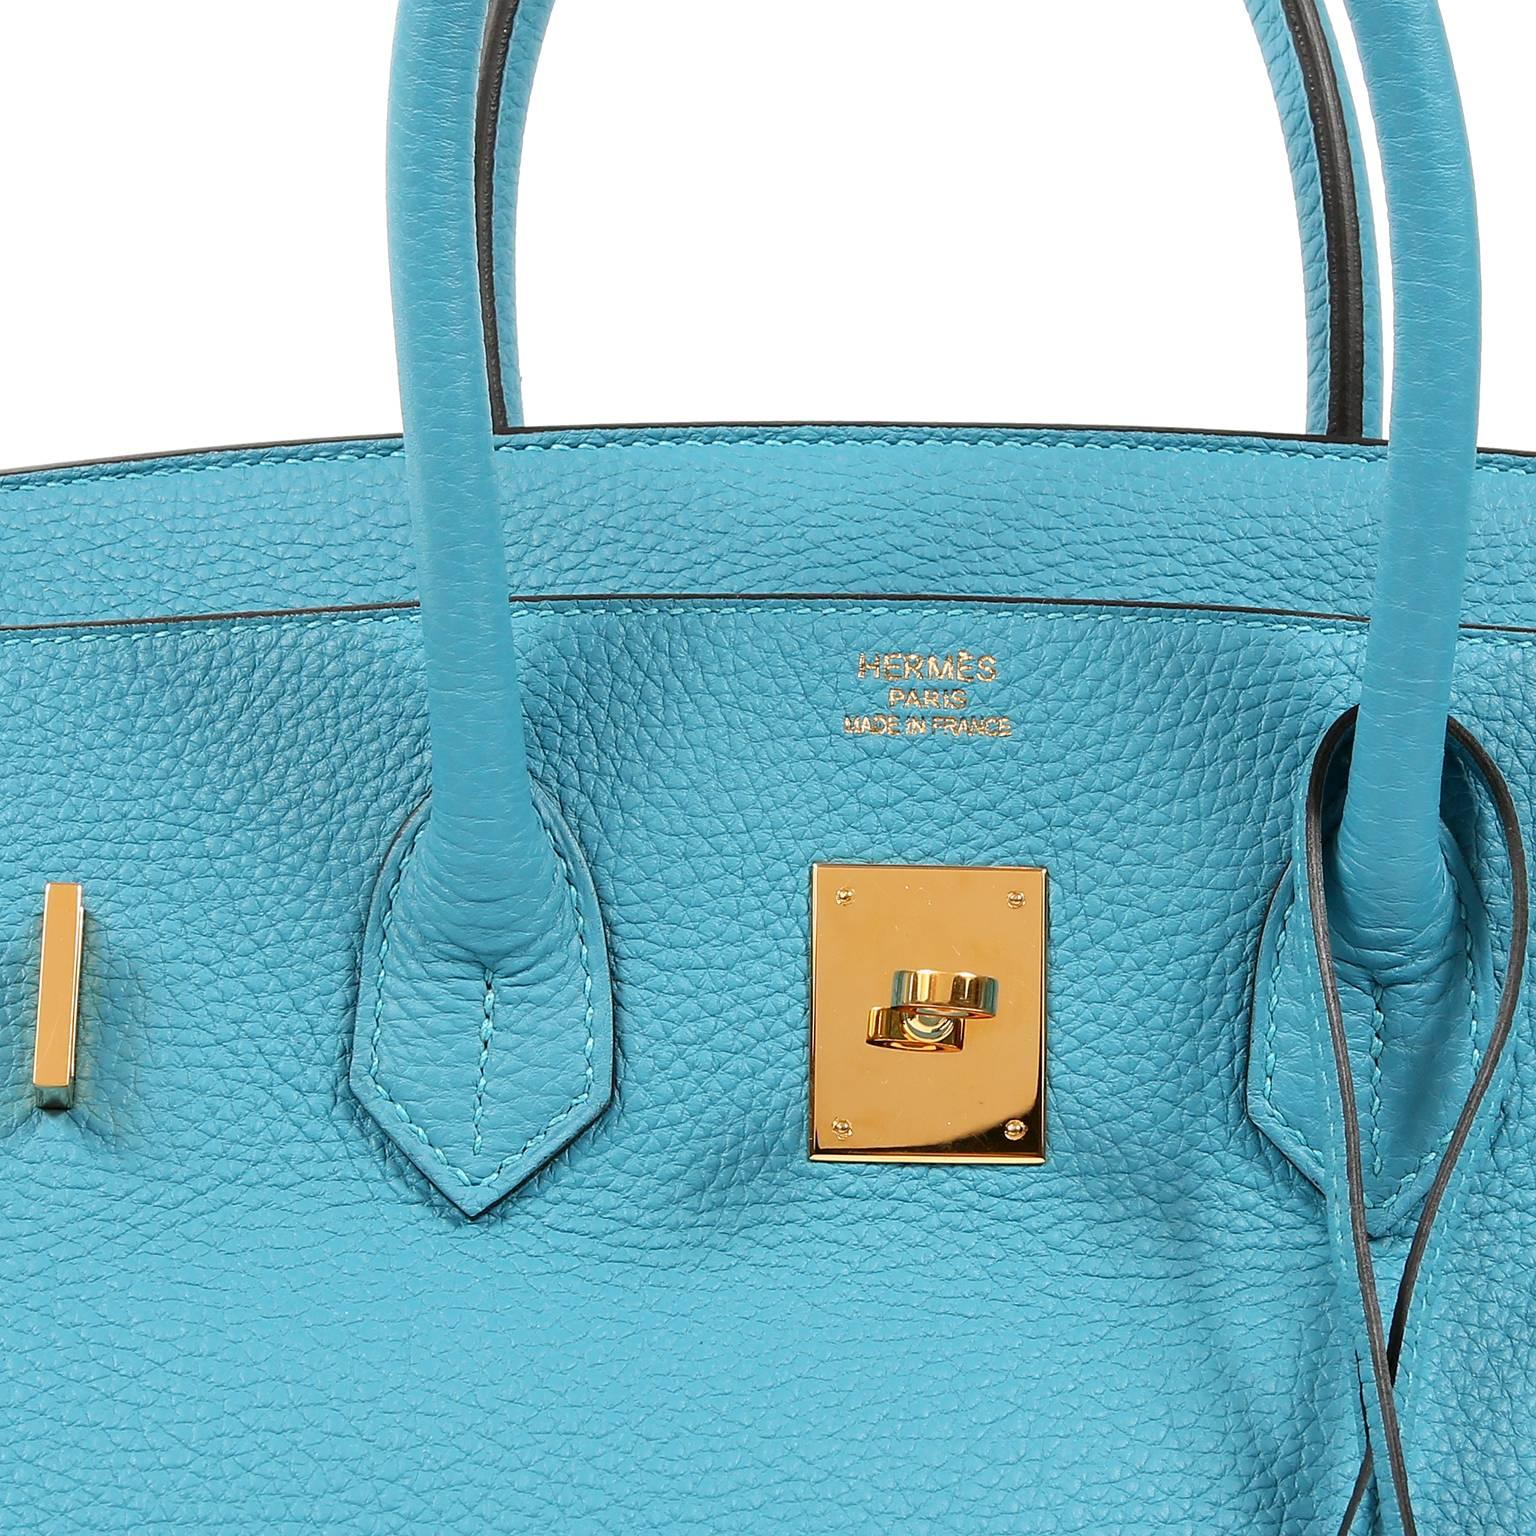 Hermes Turquoise Togo 35 cm Birkin Bag with GHW For Sale 2